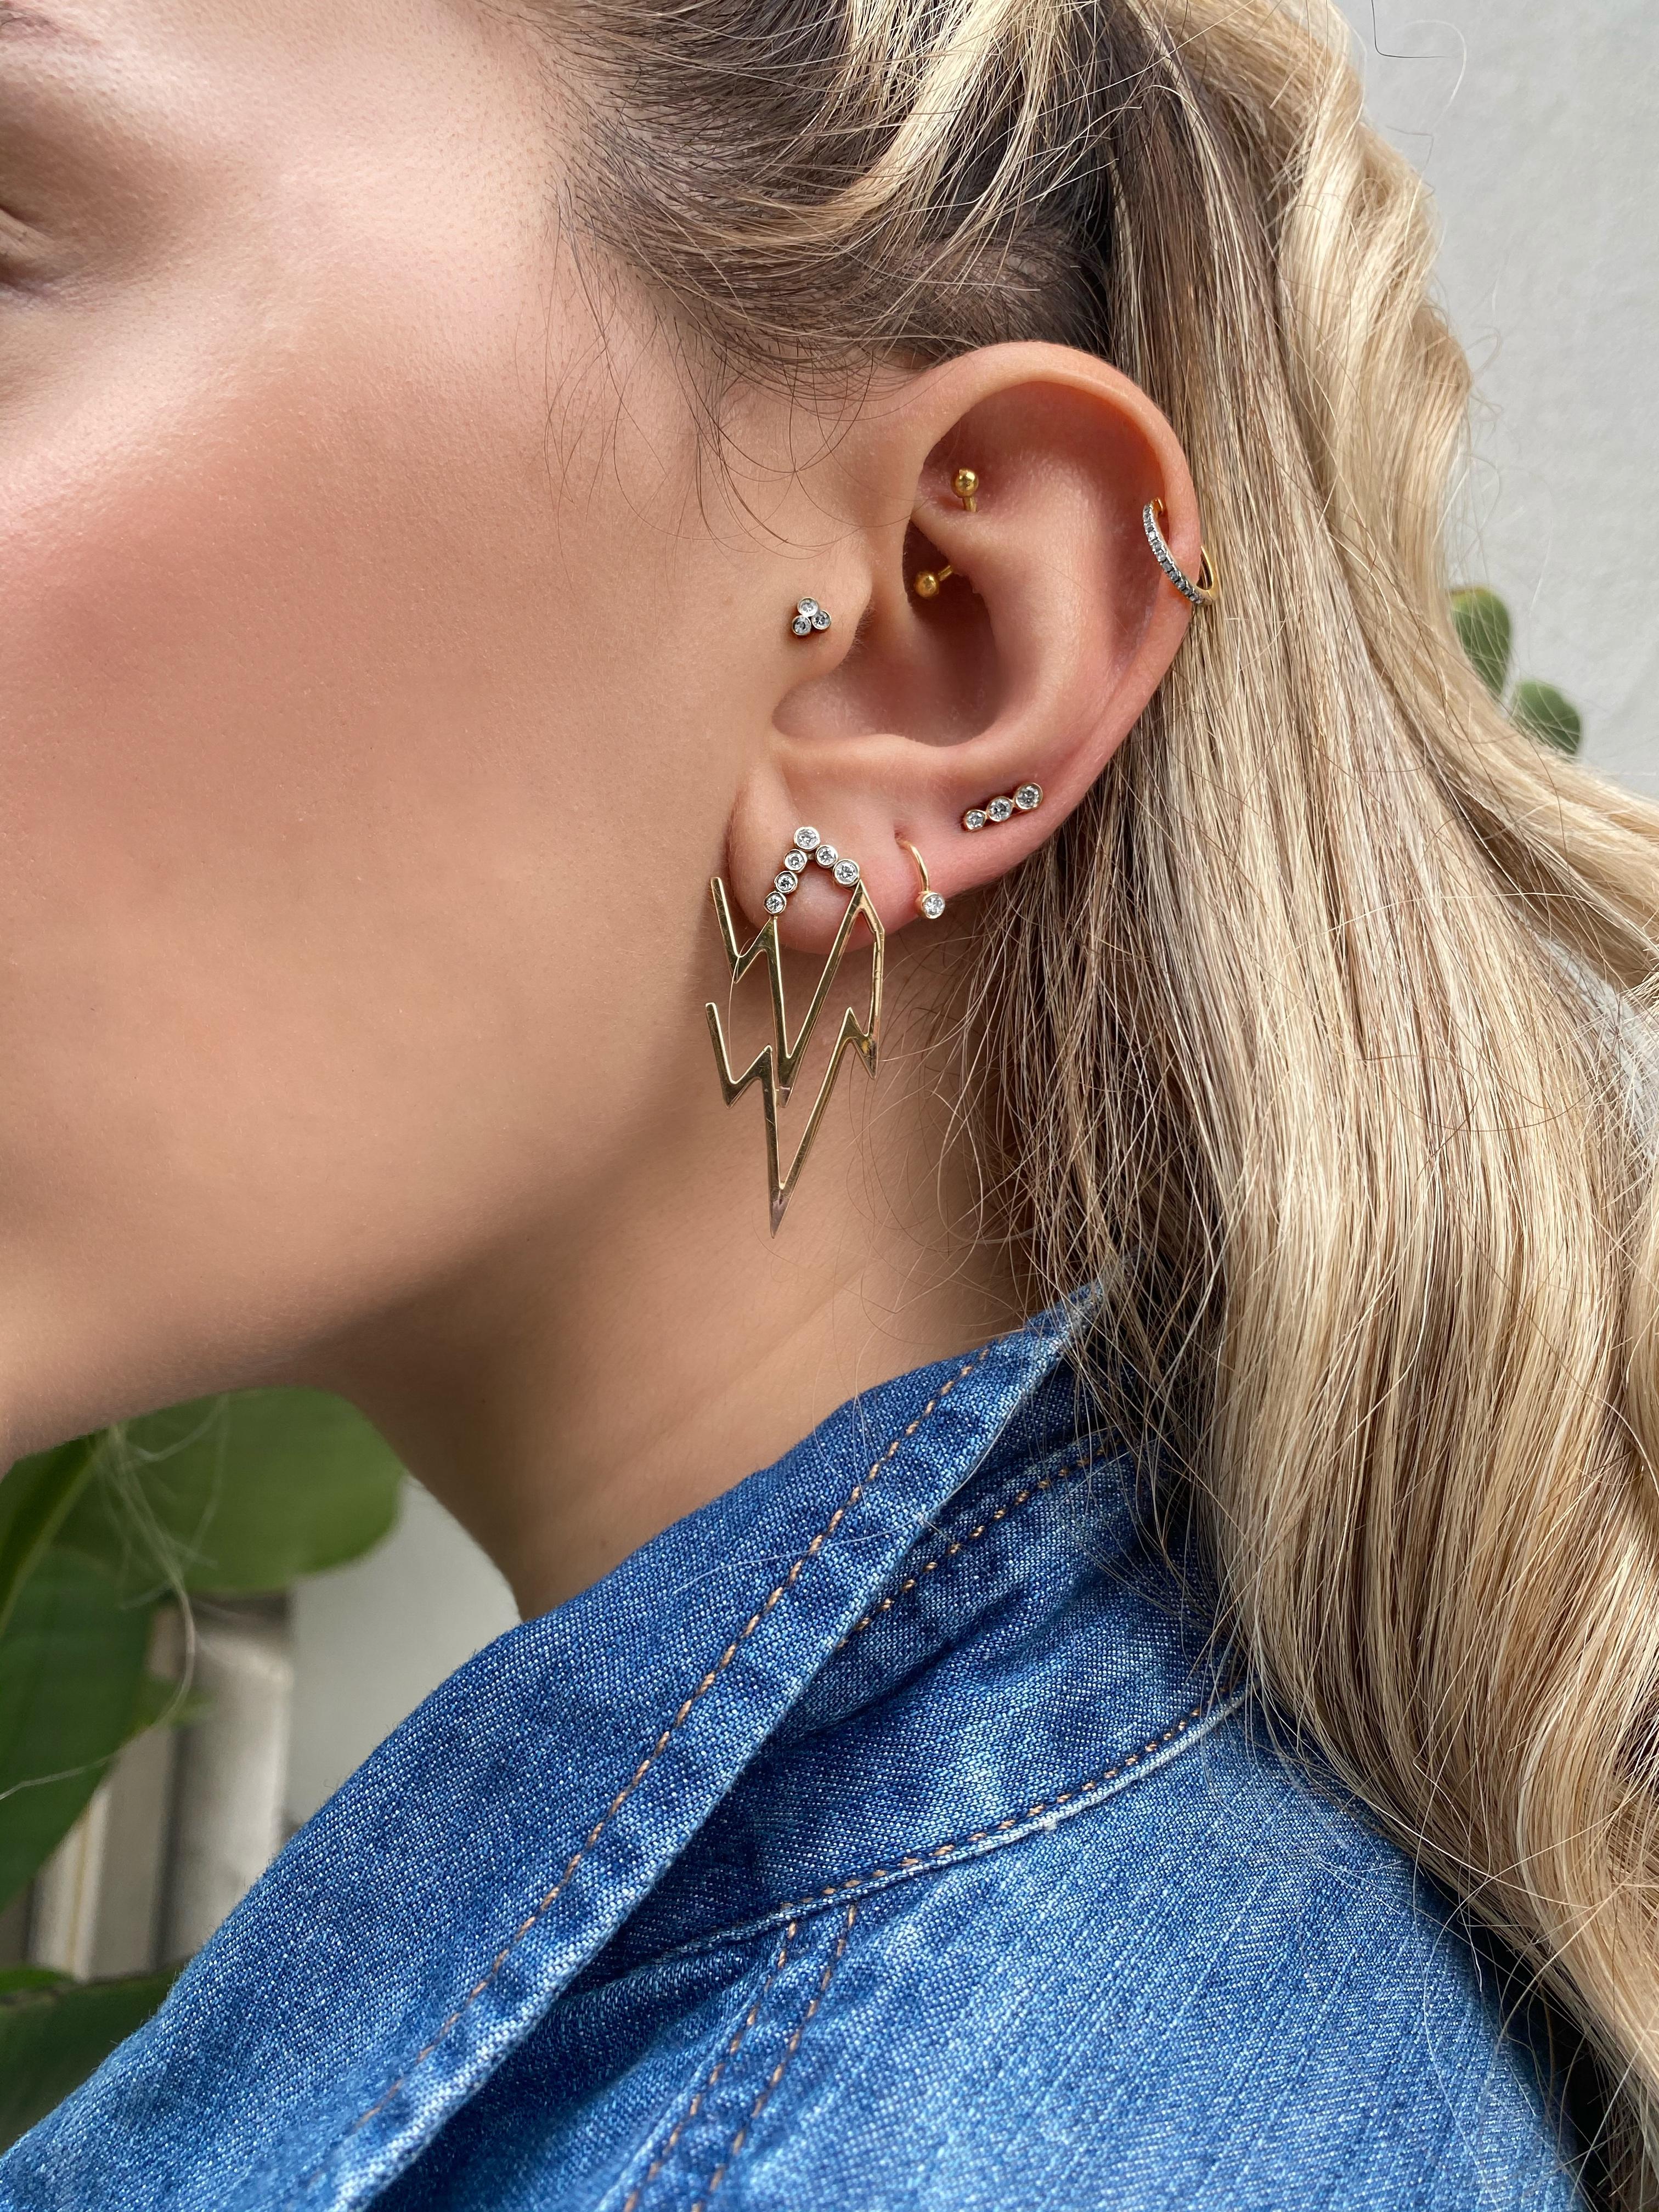 The Thunder Collection represents the power within yourself as the lightning design has always had a deep and strong meaning in history and legends. 

6 White diamond lightning earrings in 14k rose gold by selda jewellery

Additional